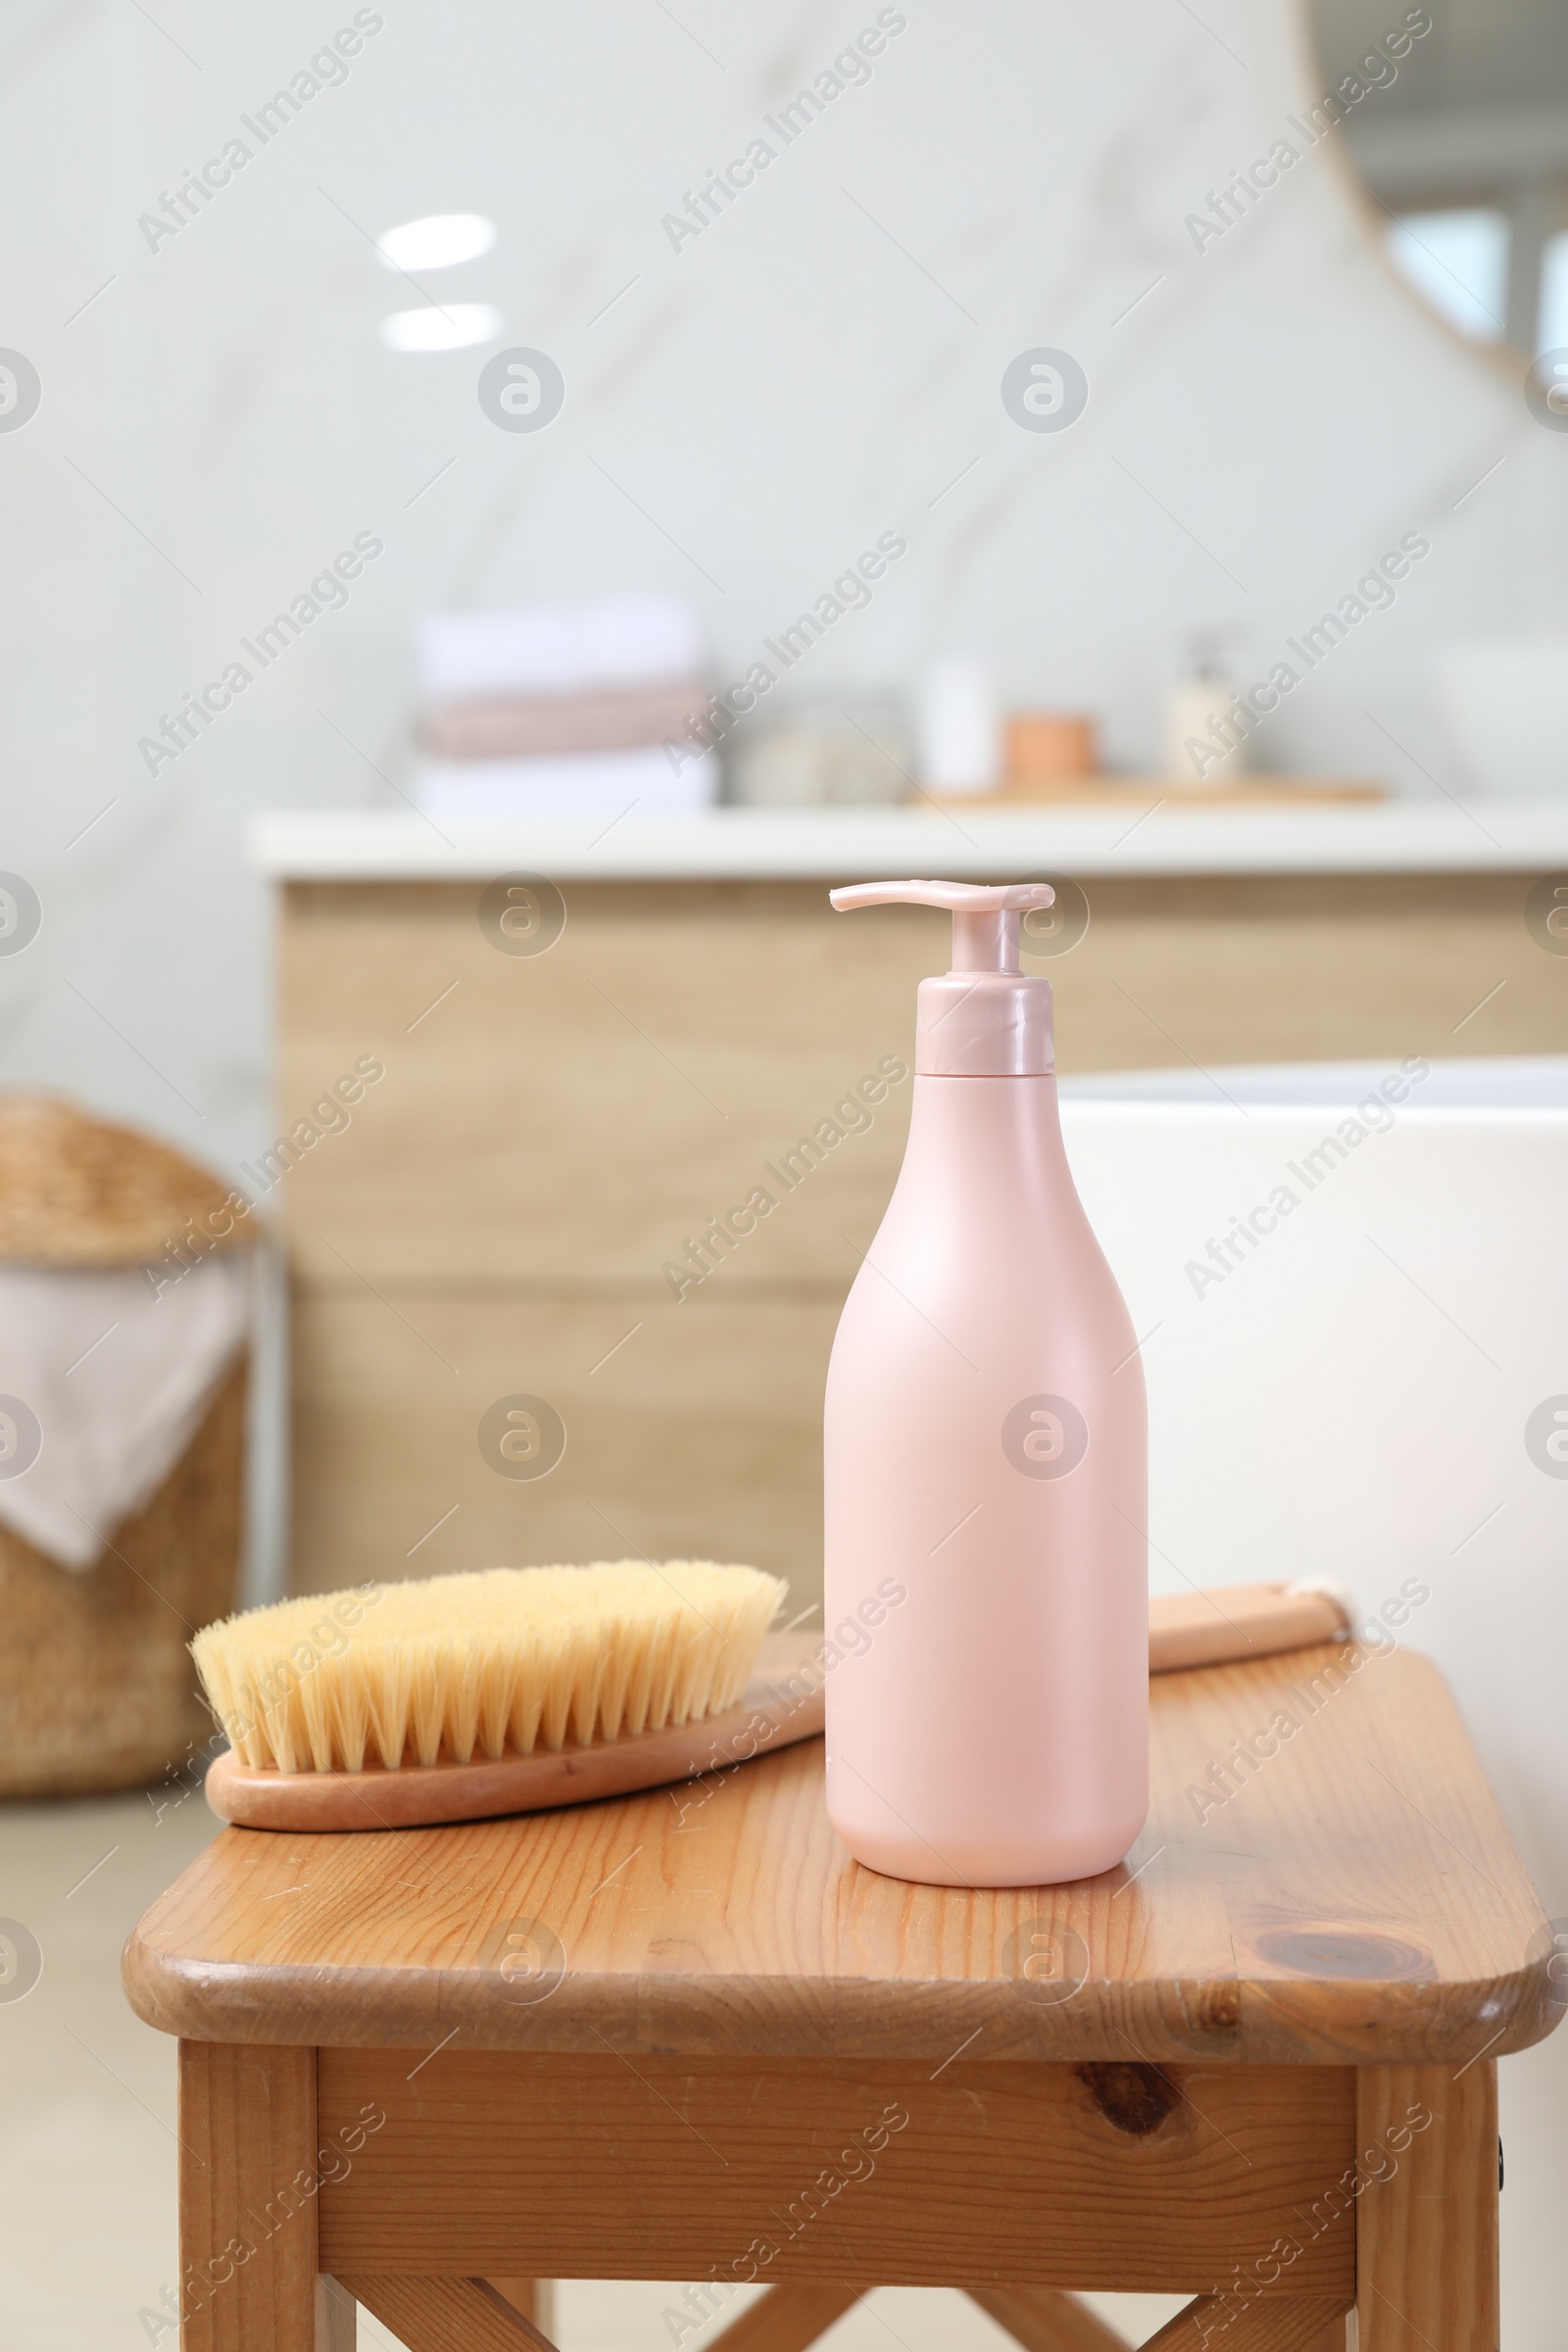 Photo of Bottle of shower gel and brush on wooden table near tub in bathroom